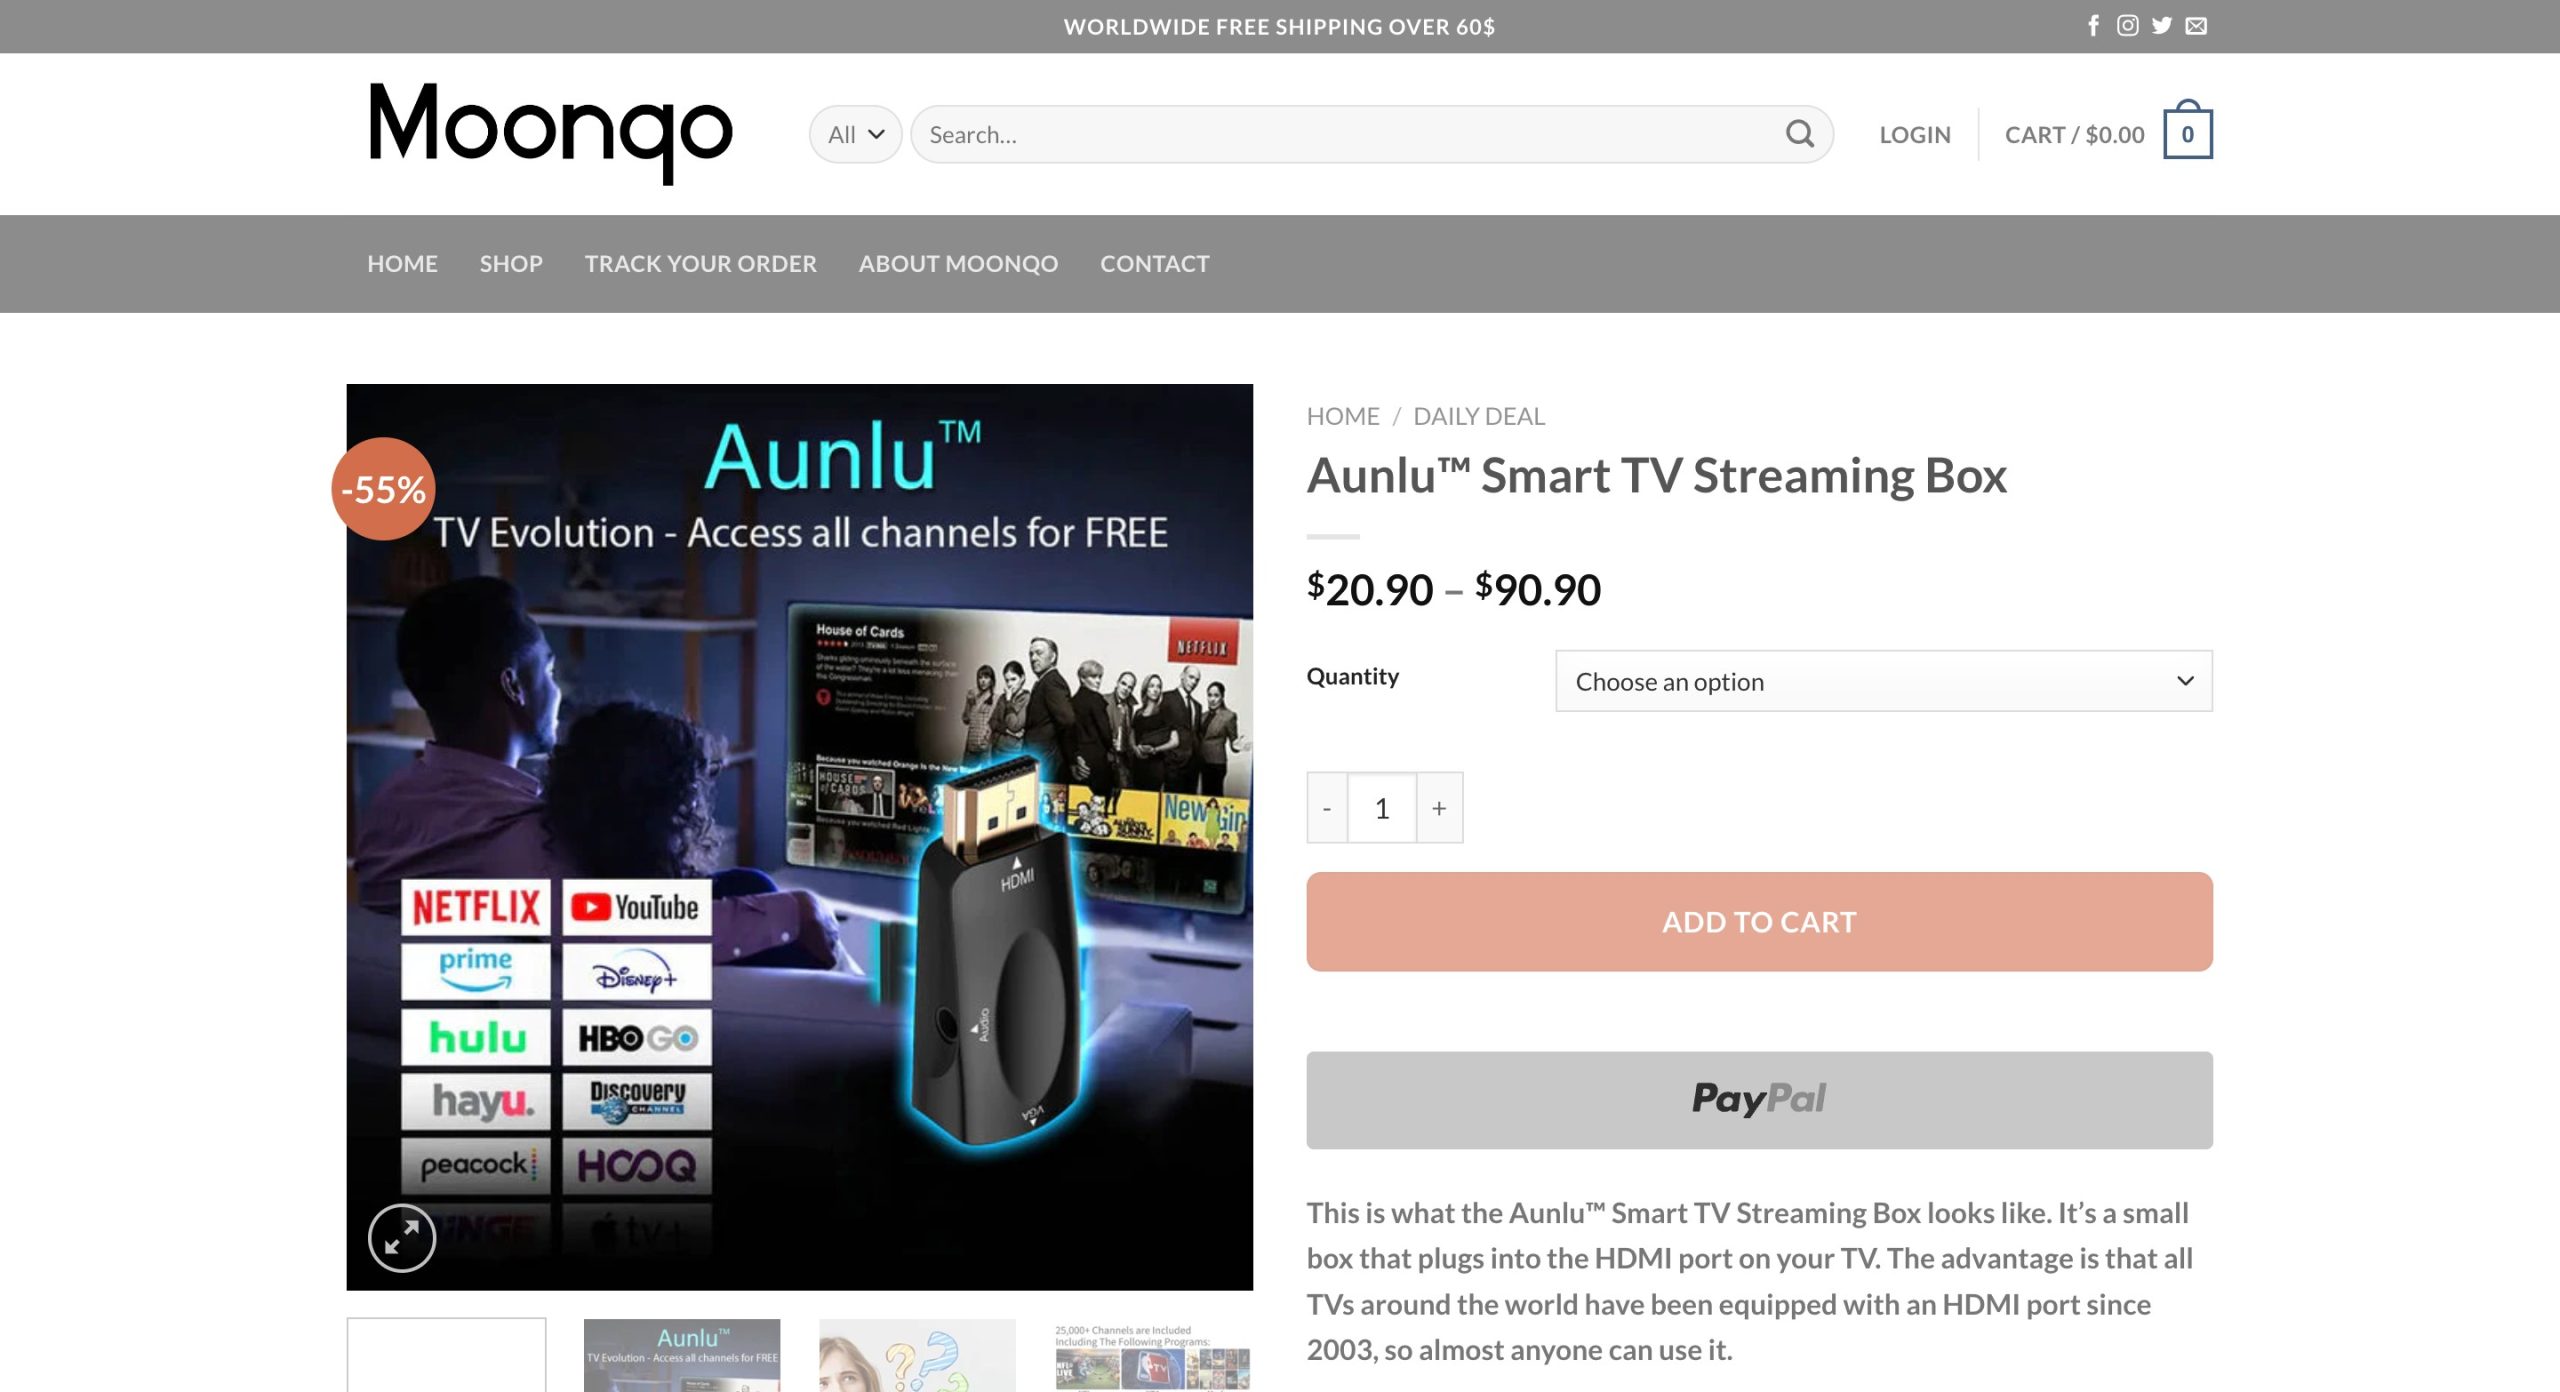 Is Aunlu TV Streaming Device a Scam? Here's The Truth - SabiReviews